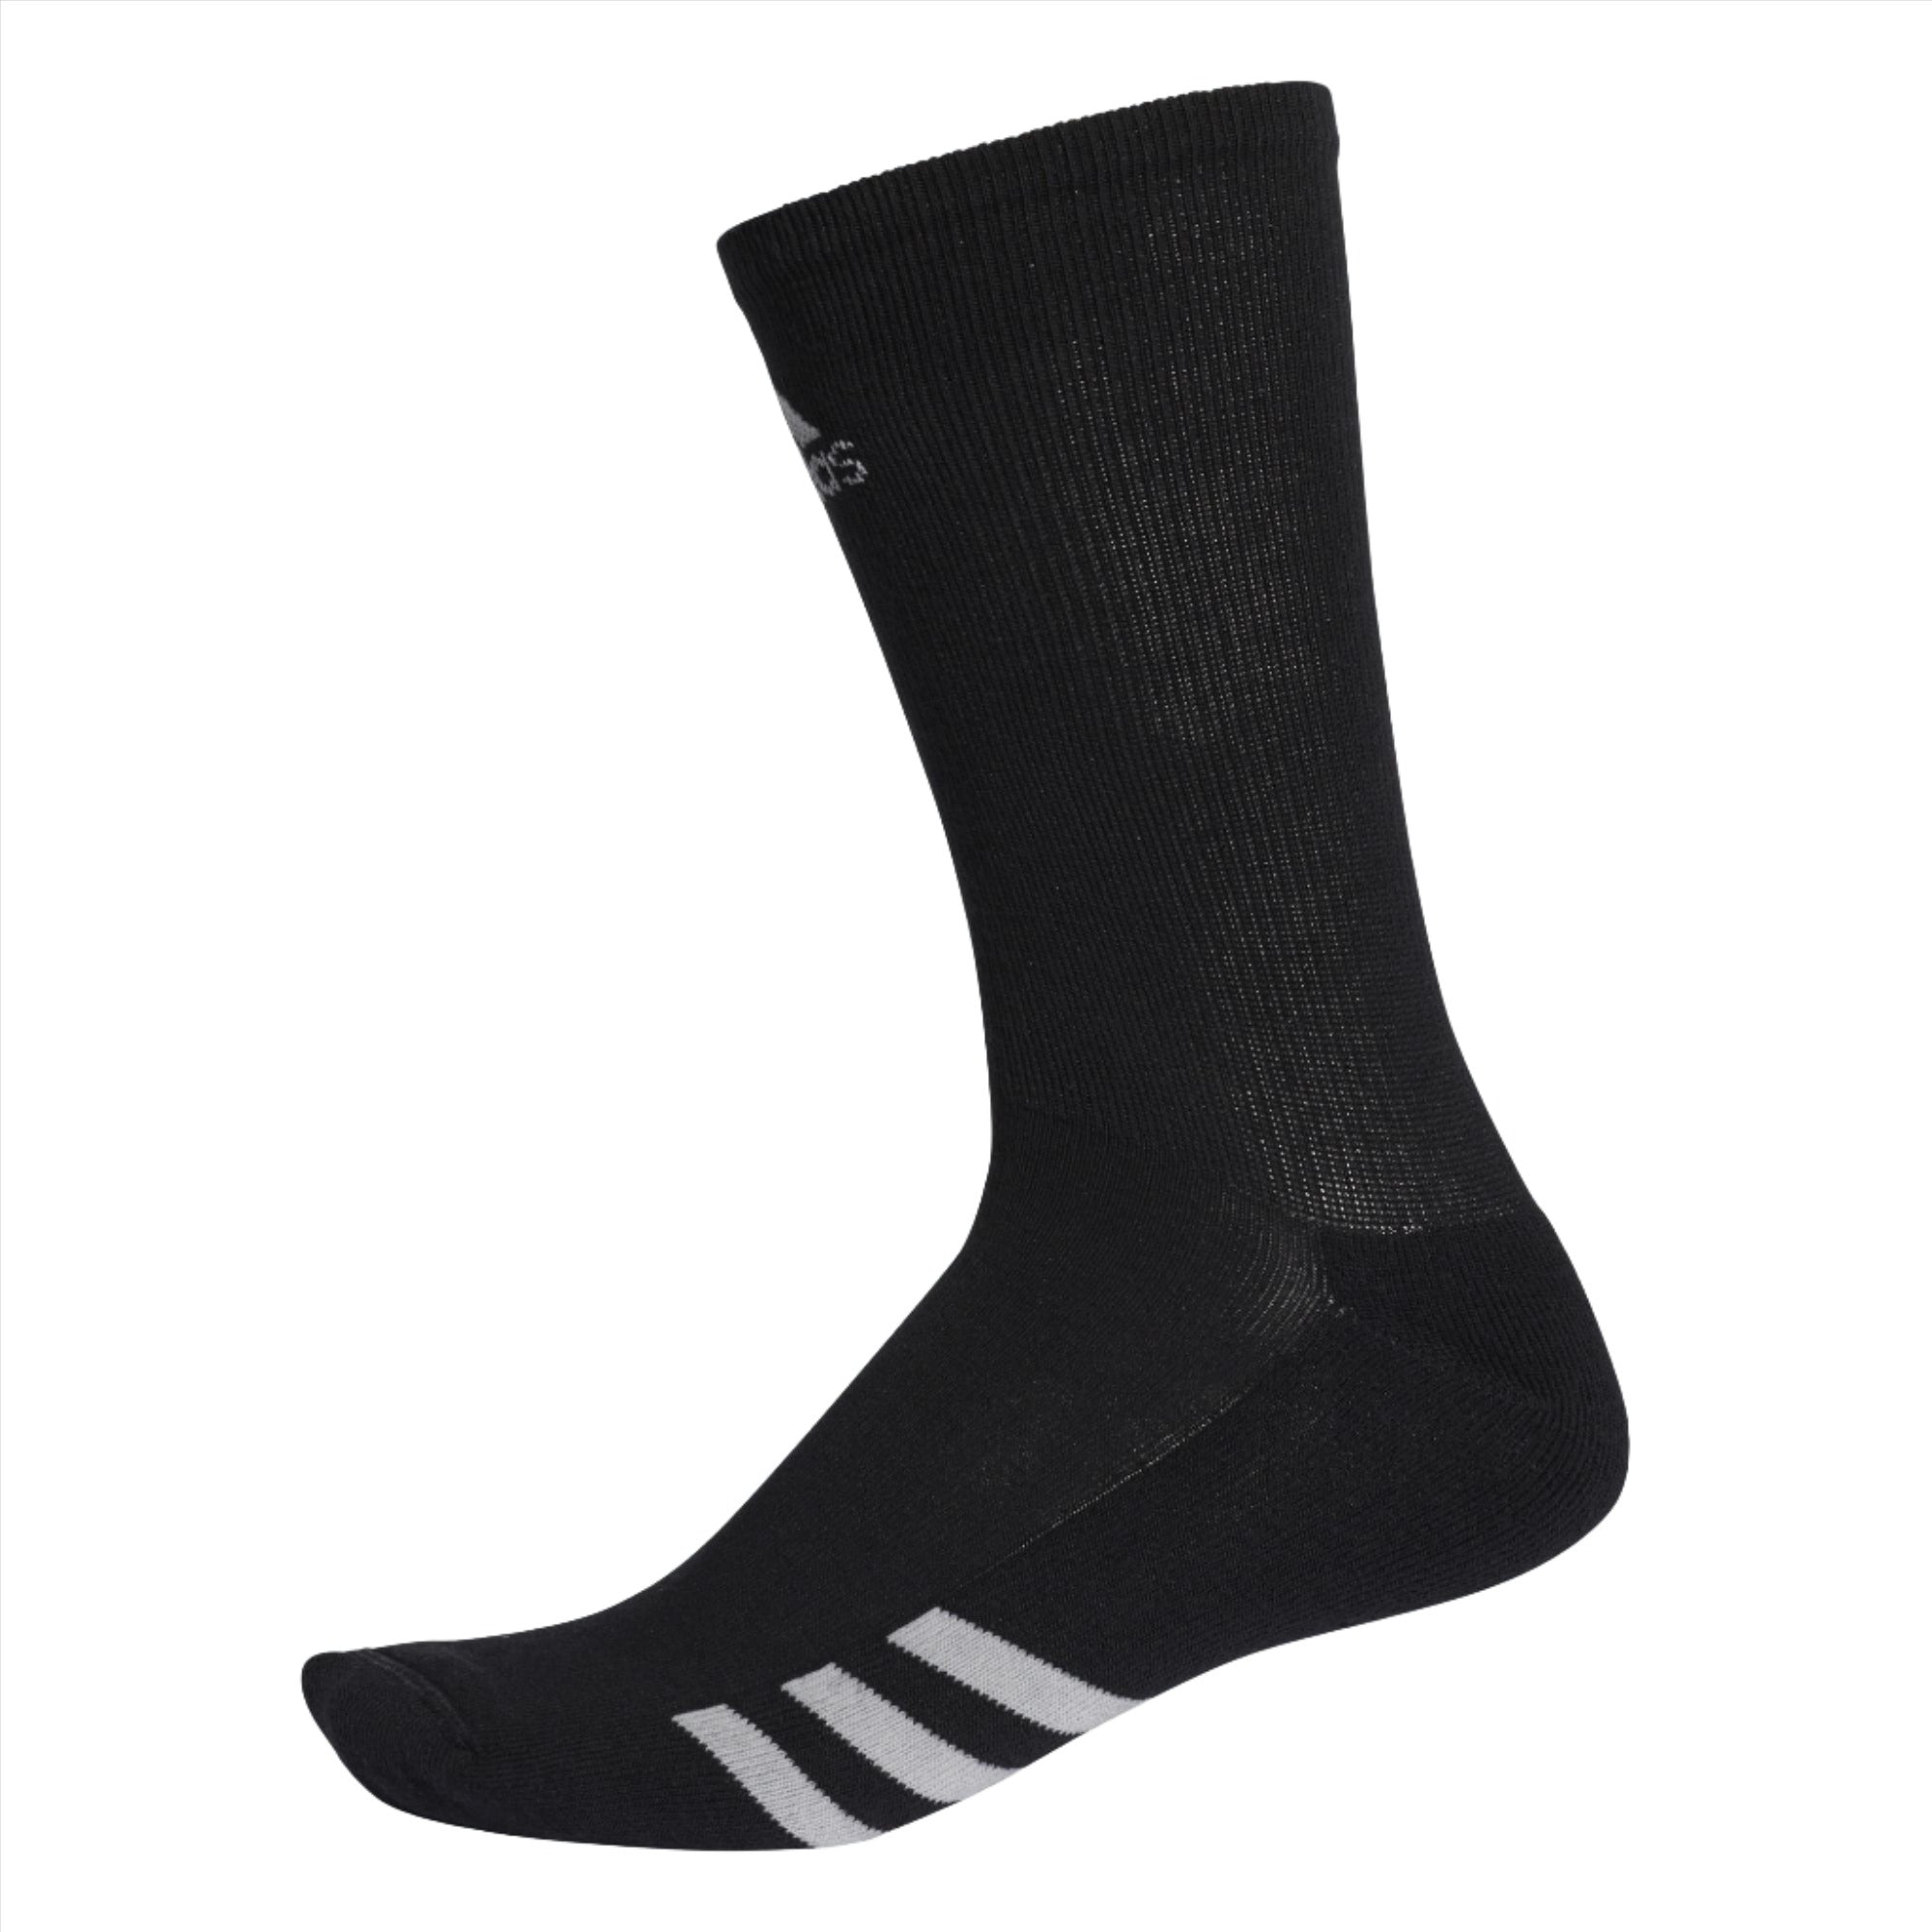 CALCETINES ADIDAS CLASSIC CREW PACK 3 CALCETINES ADIDAS HOMBRE ADIDAS